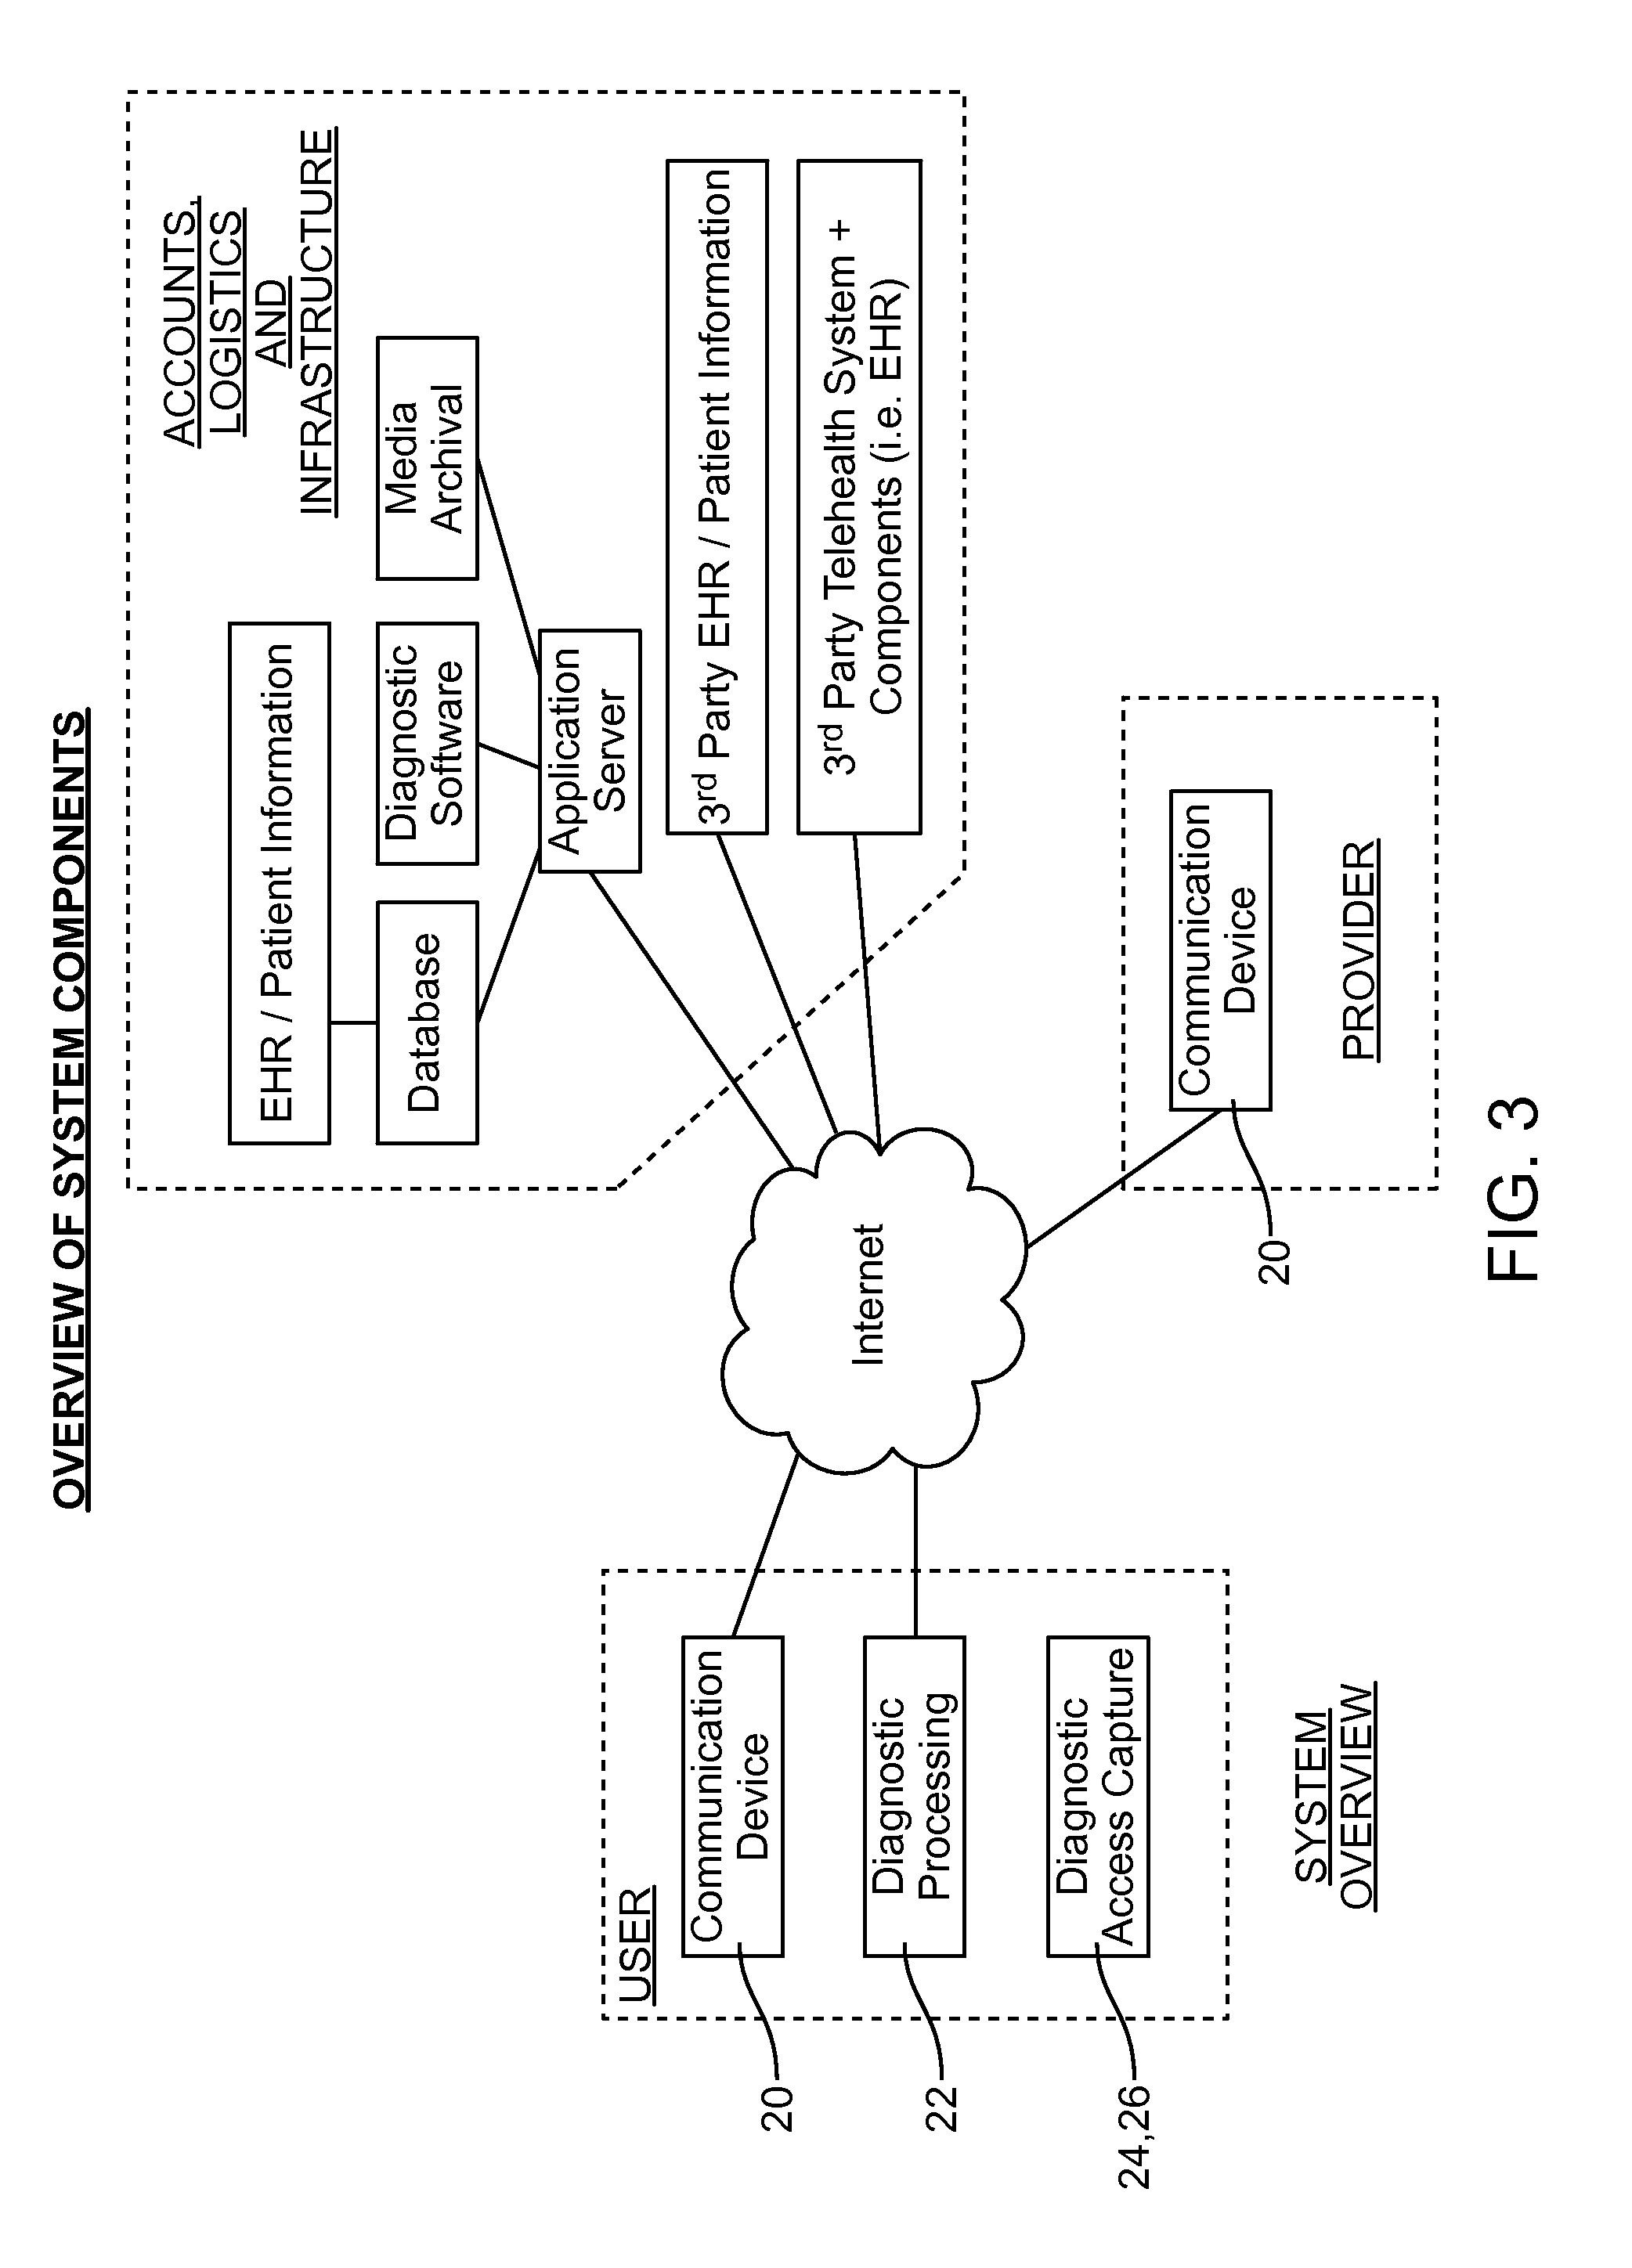 Devices, Methods and Systems for Acquiring Medical Diagnostic Information and Provision of Telehealth Services